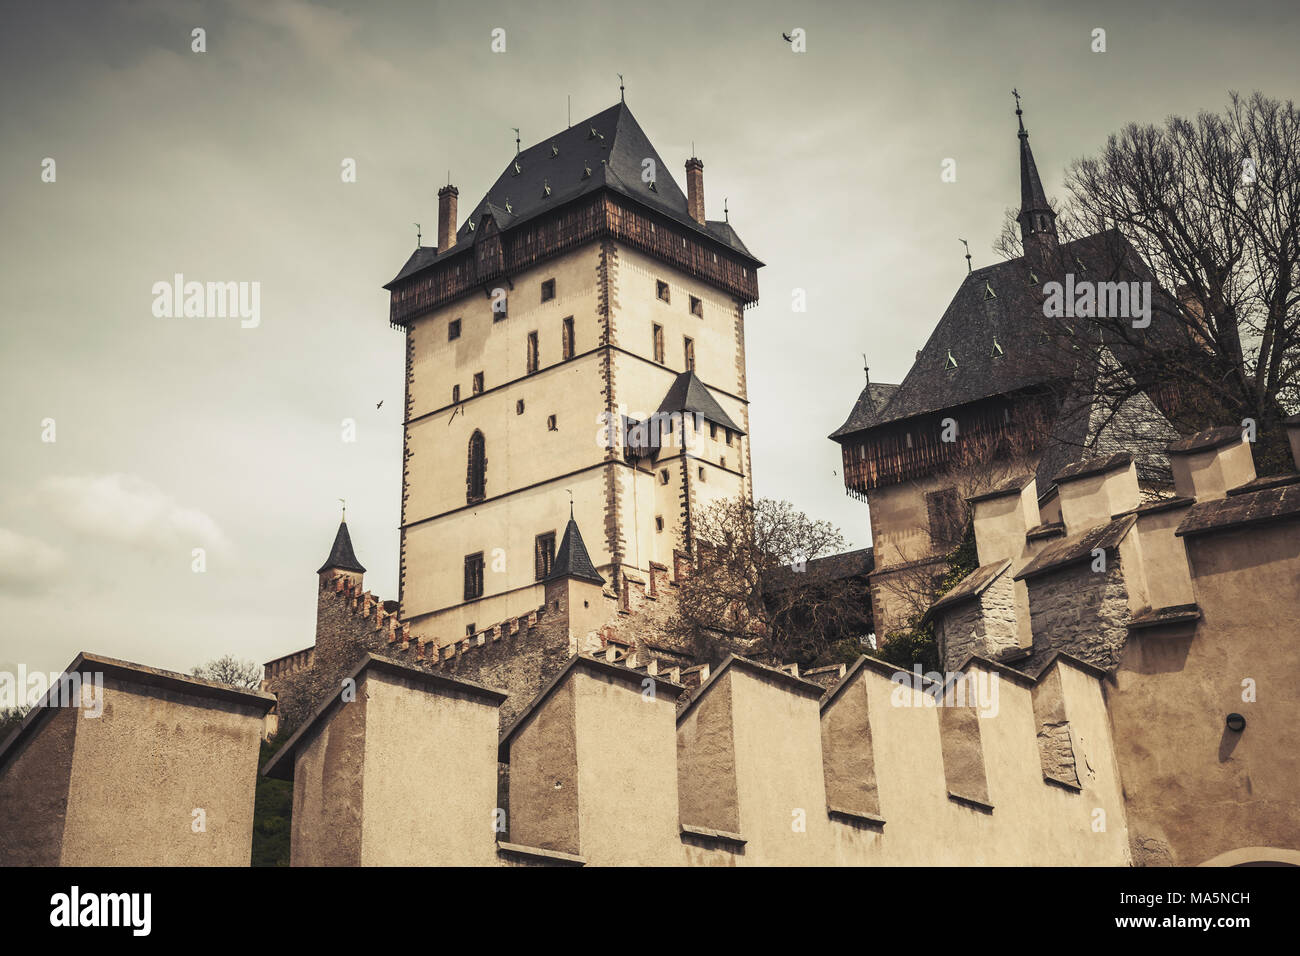 Karlstejn castle exterior. Gothic castle founded 1348 CE by Charles IV, Holy Roman Emperor-elect and King of Bohemia. Karlstejn village, Czech Republi Stock Photo